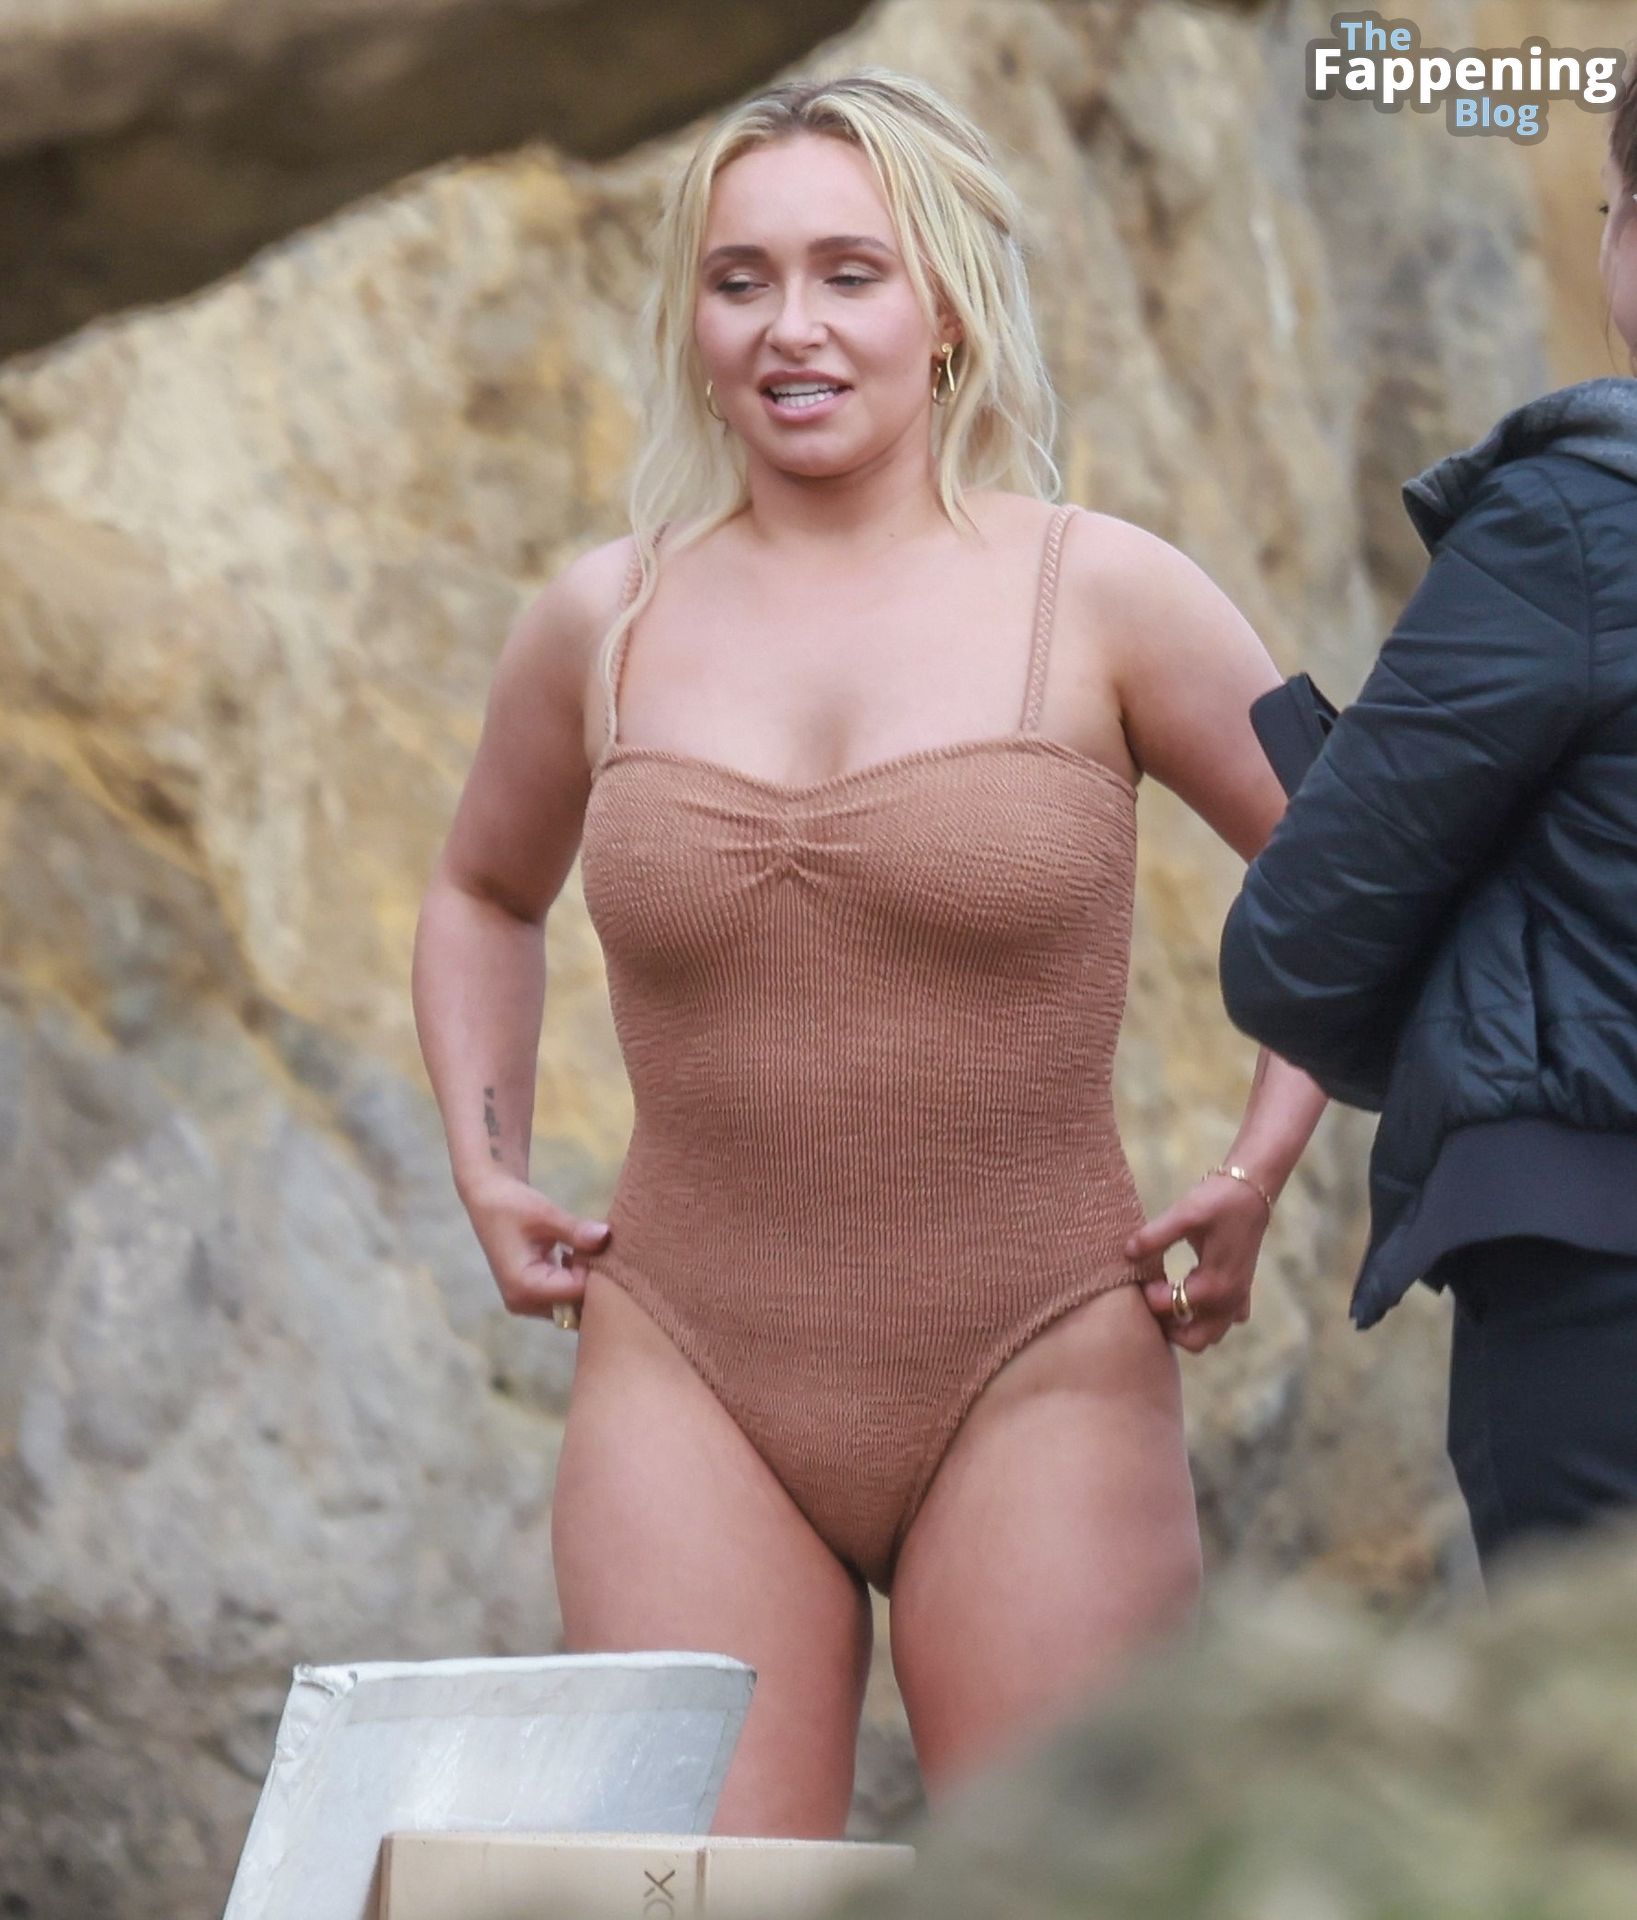 Hayden-Panettiere-Sexy-The-Fappening-Blog-71.jpg